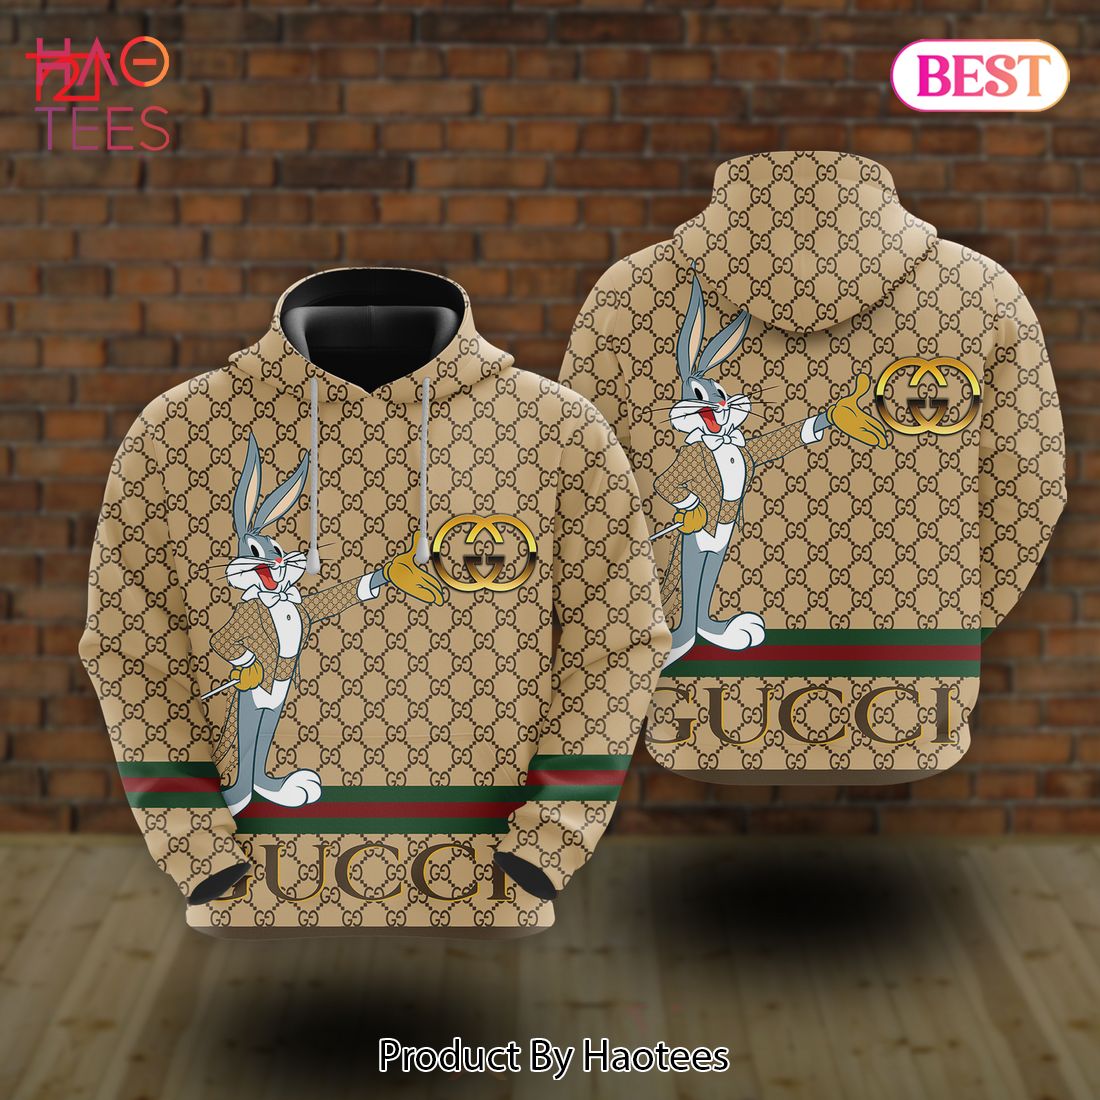 HOT Louis Vuitton Bugs Bunny Luxury 3D Hoodie Limited Edition